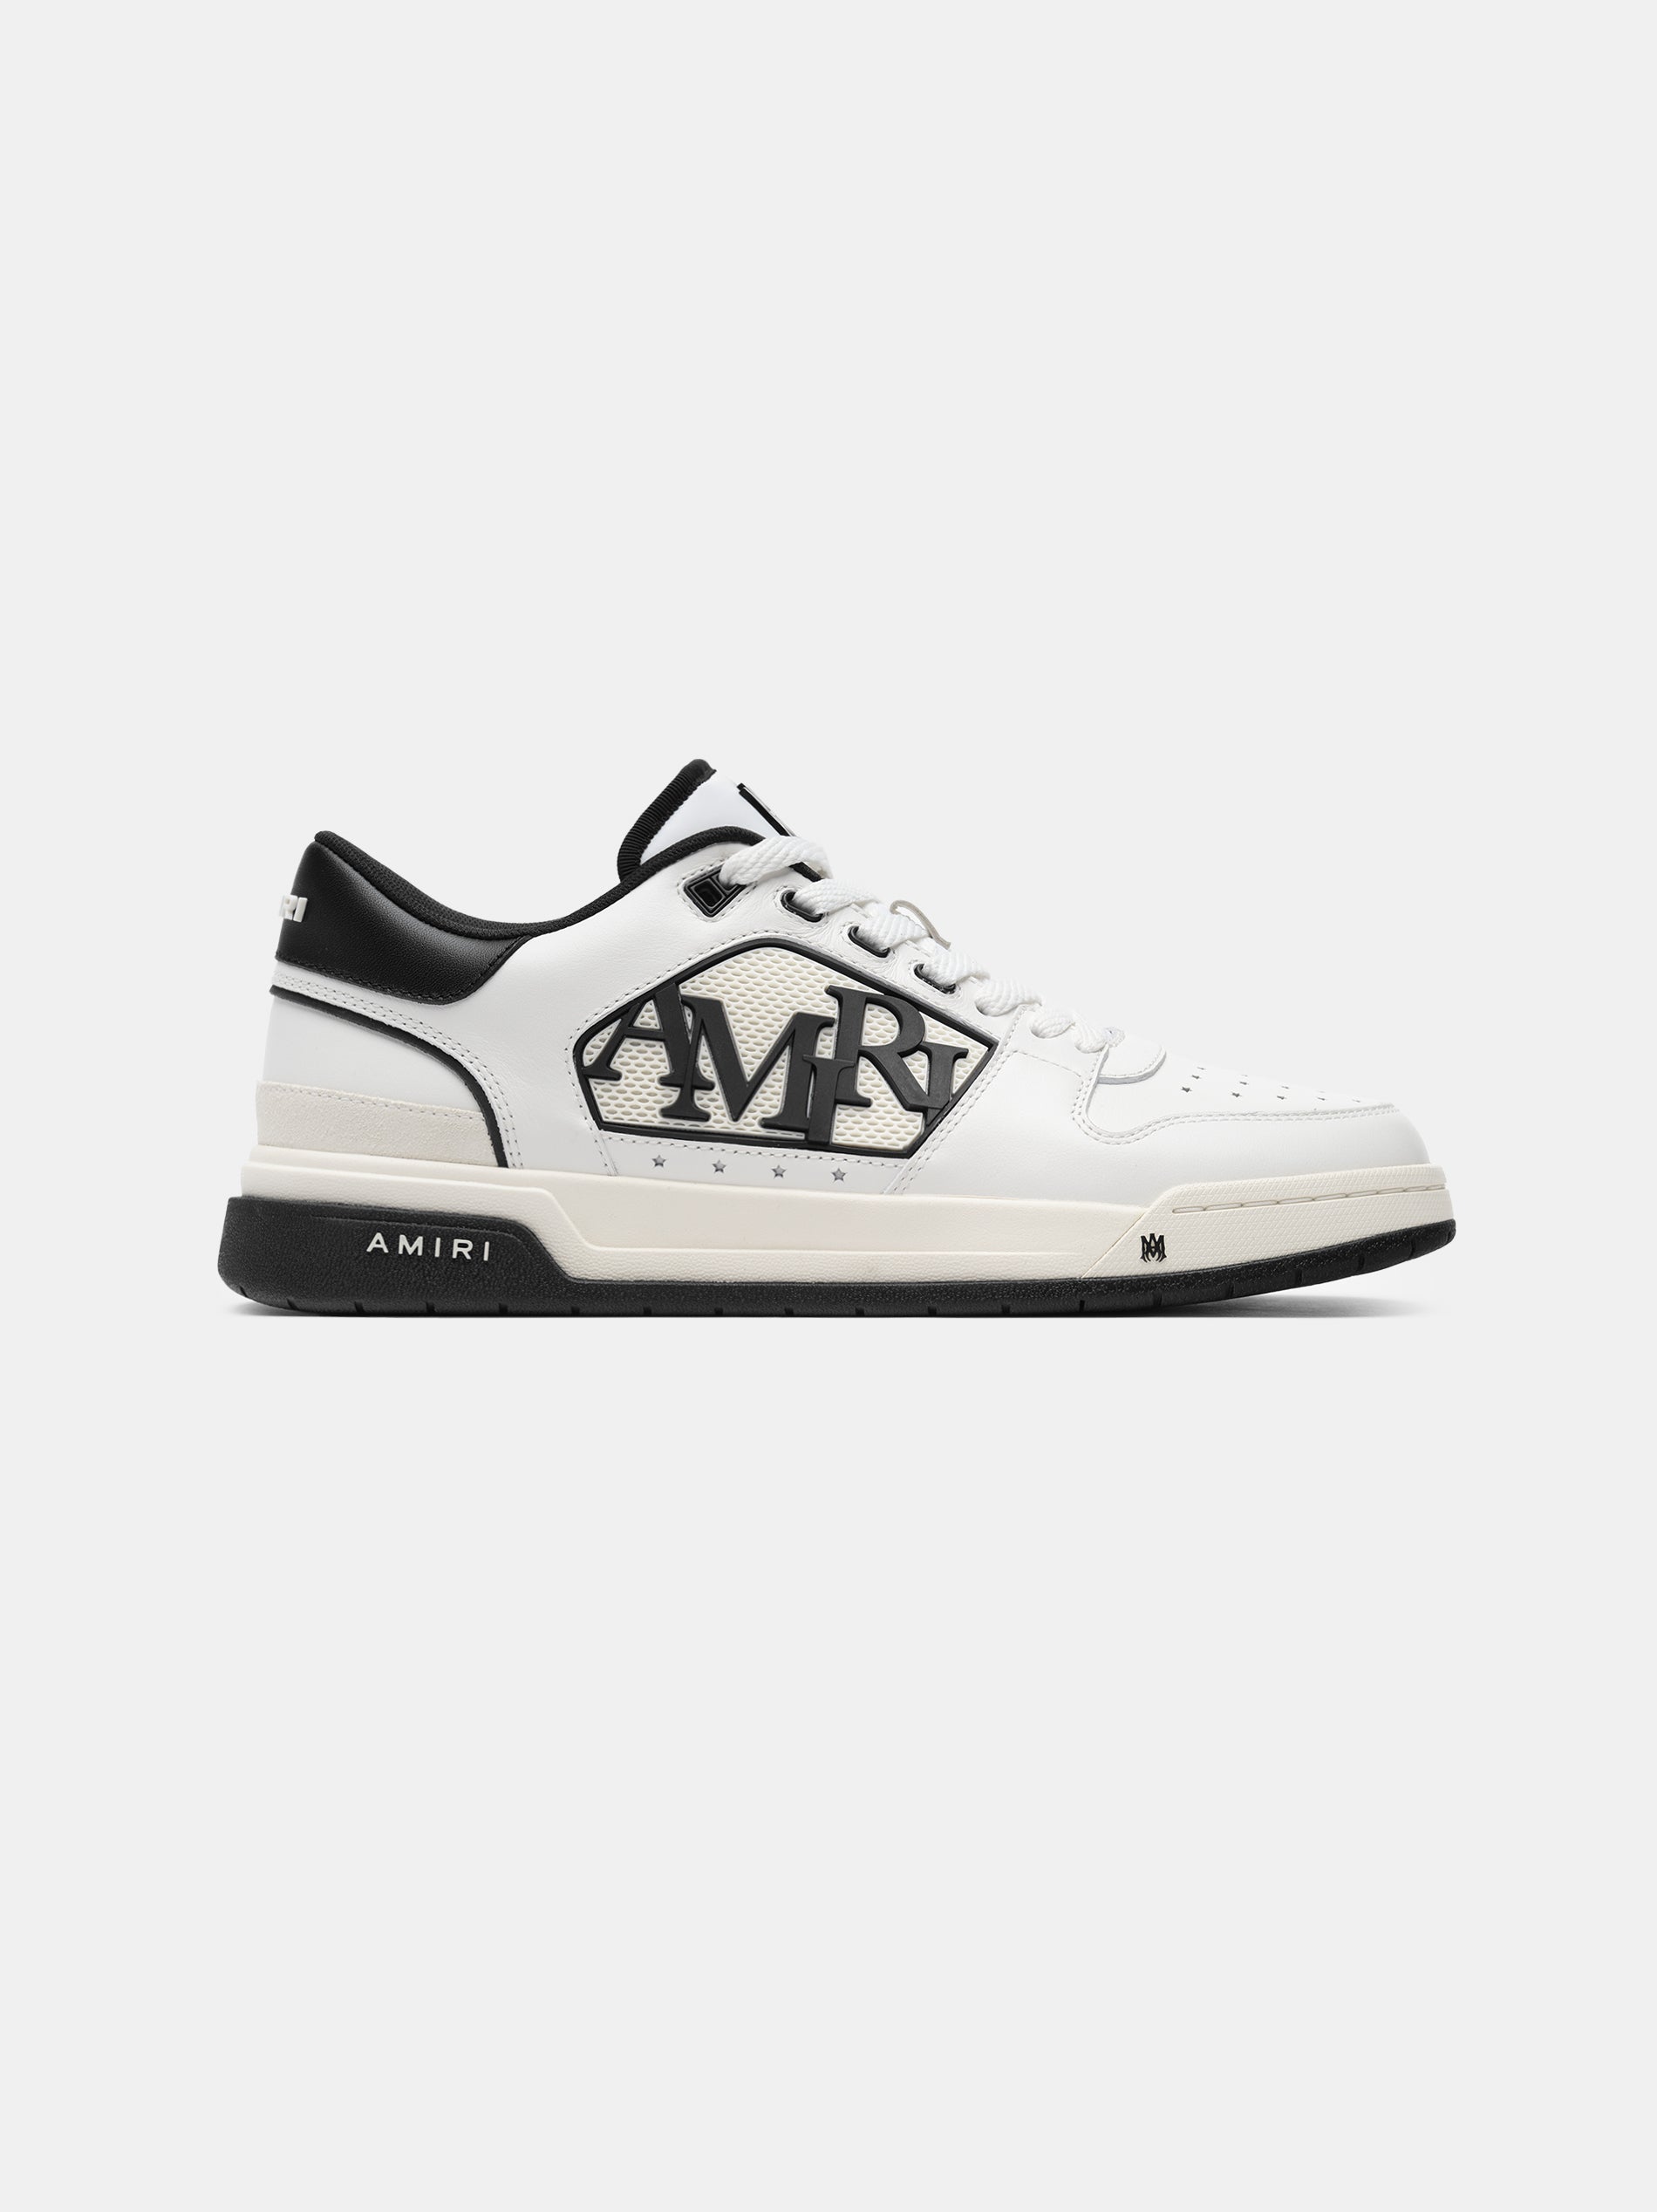 Product WOMEN - CLASSIC LOW- White Black featured image